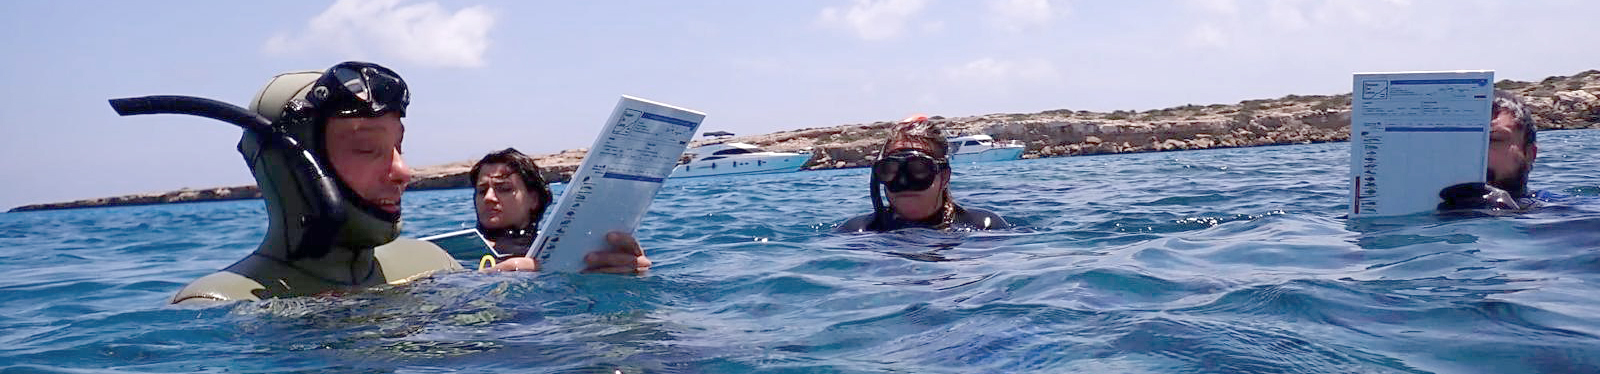 Divers during the training on the field at Cavo Greco MPA.